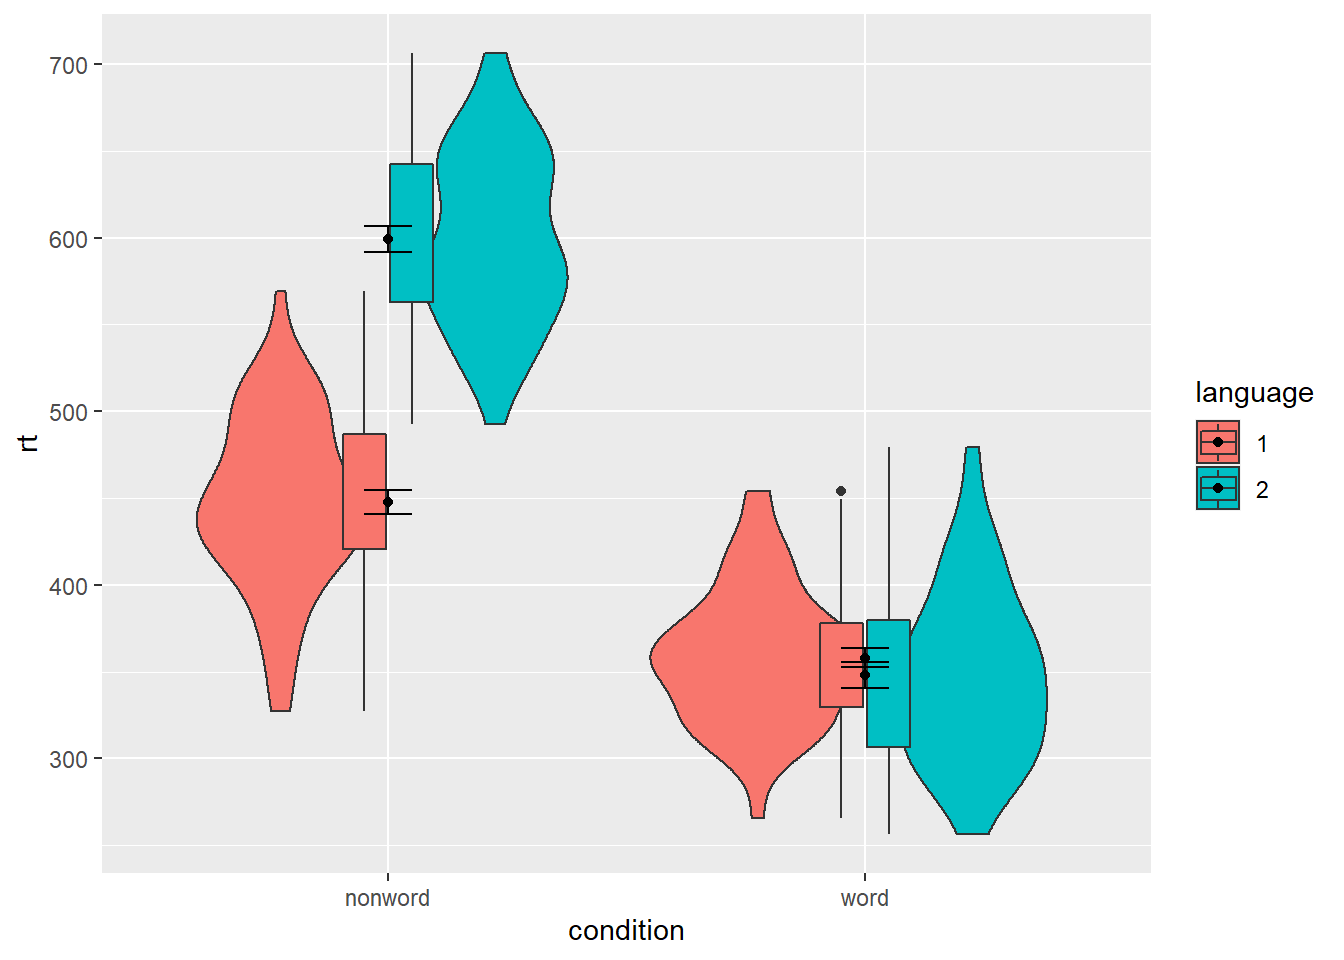 Grouped violin-boxplots without repositioning.